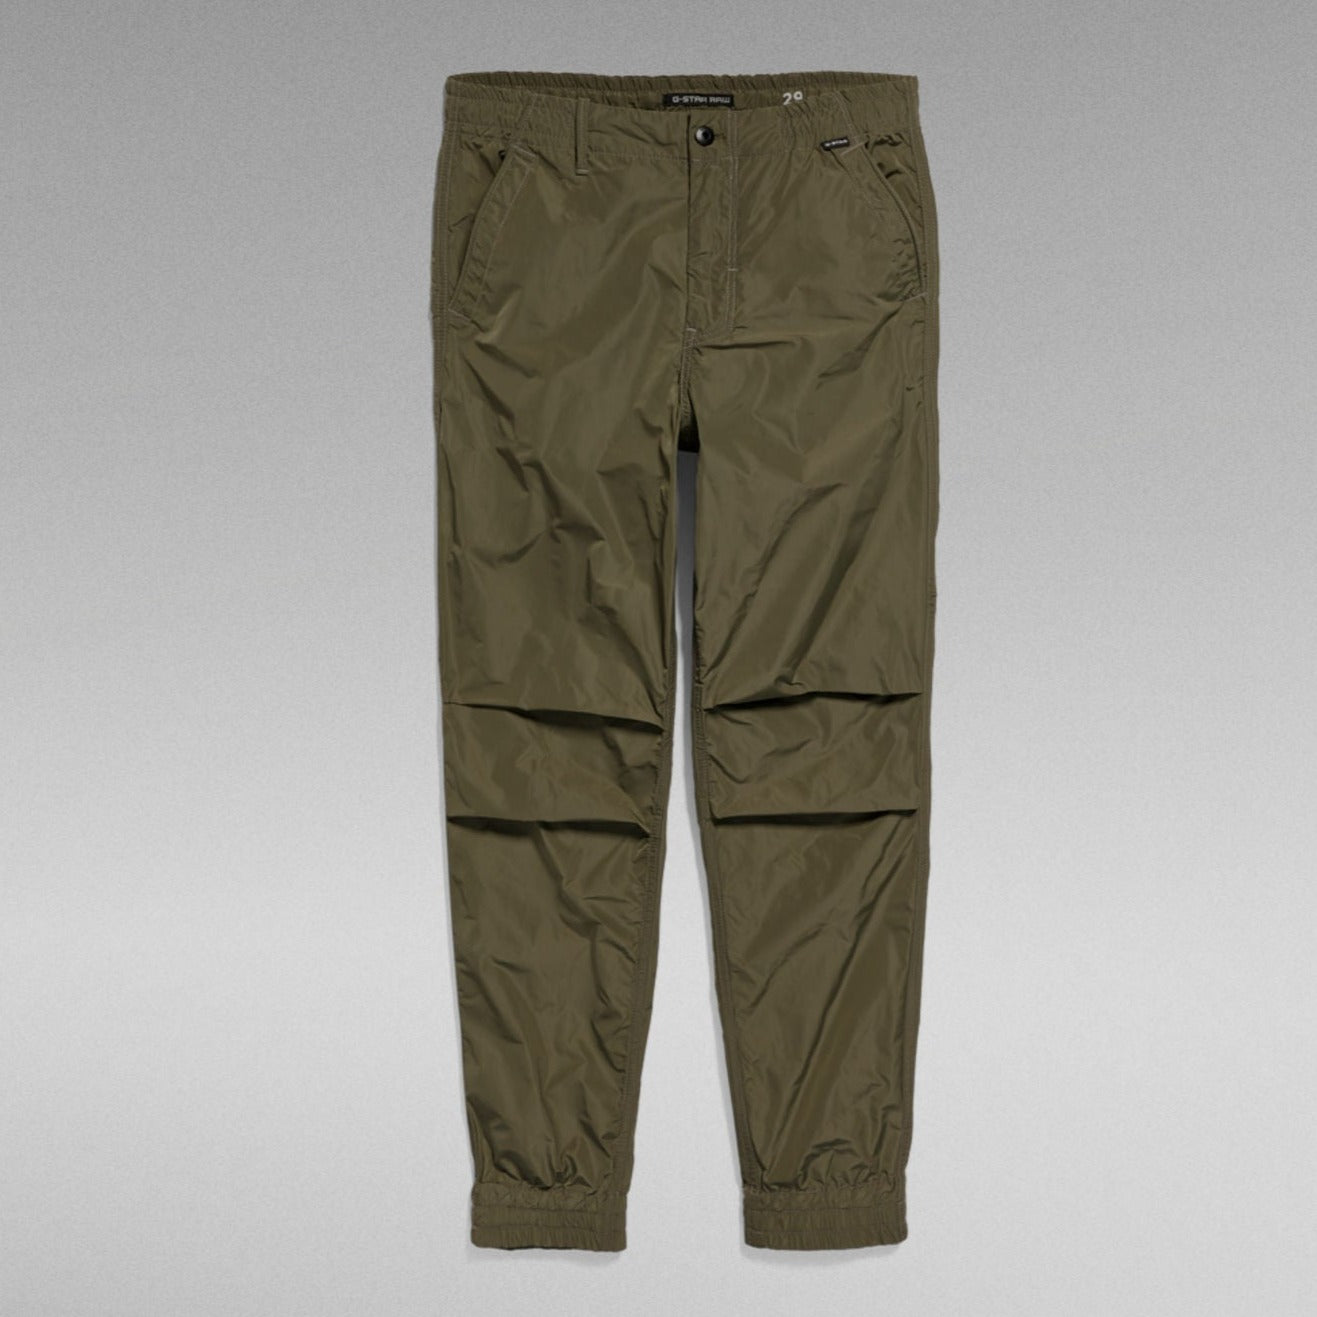 G-Star Raw - Trainer RCT - Shadow Olive